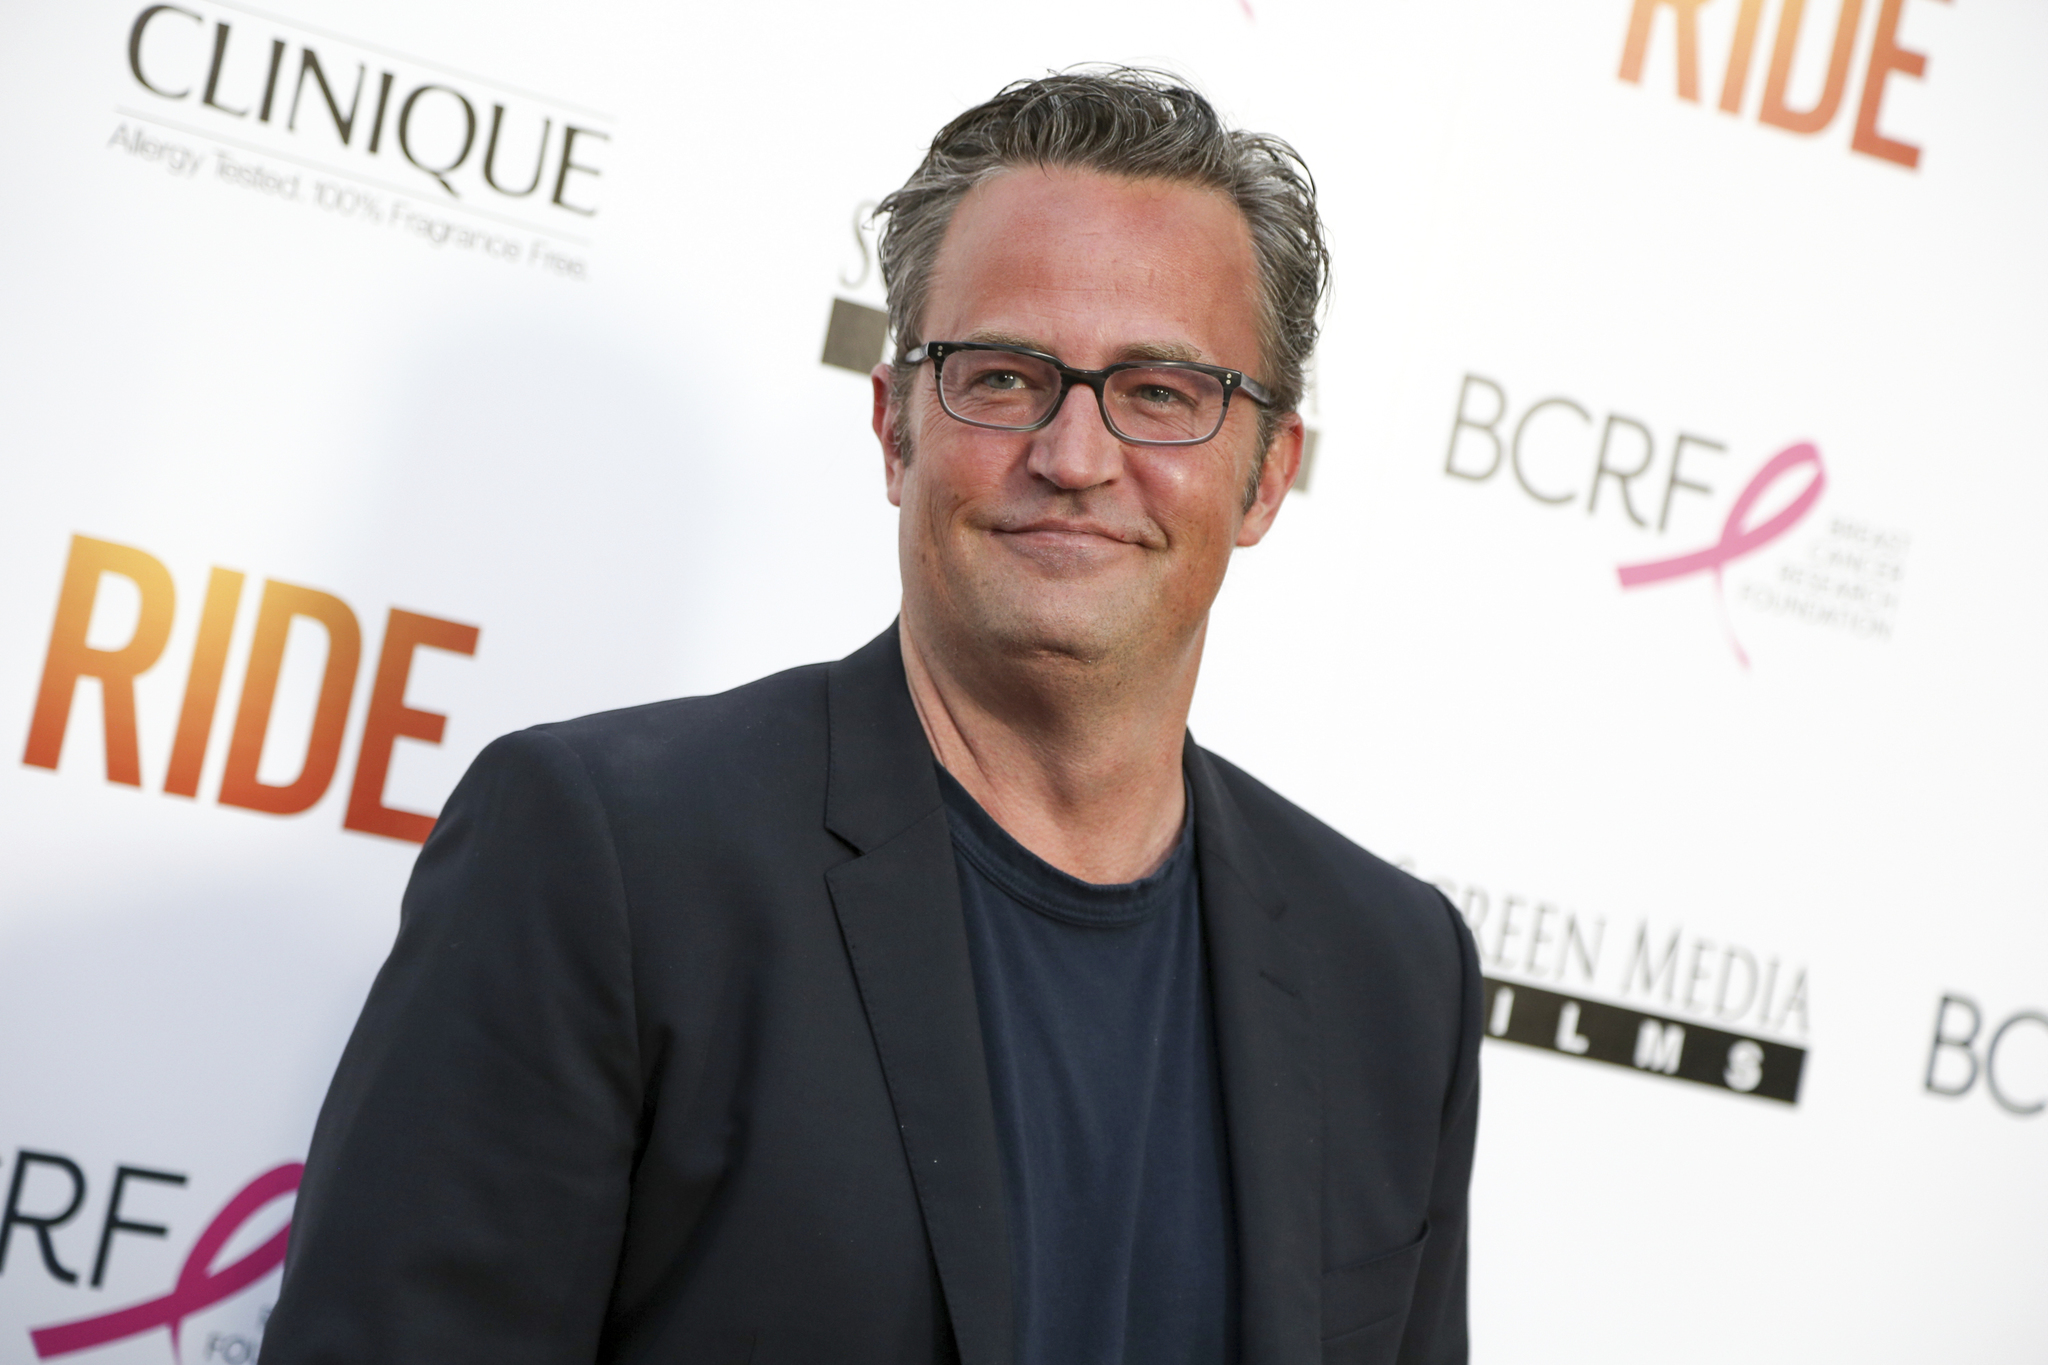 Matthew Perry arrives at the premiere of "Ride" at The Arclight Hollywood Theater in Los Angeles. Perry, who starred as Chandler Bing in the hit series "Friends," has died. He was 54. The Emmy-nominated actor was found dead of an apparent drowning at his Los Angeles home on Saturday, according to the Los Angeles Times and celebrity website TMZ, which was the first to report the news. Both outlets cited unnamed sources confirming Perry's death. His publicists and other representatives did not immediately return messages seeking comment. (Photo by Rich Fury/Invision/AP, File)